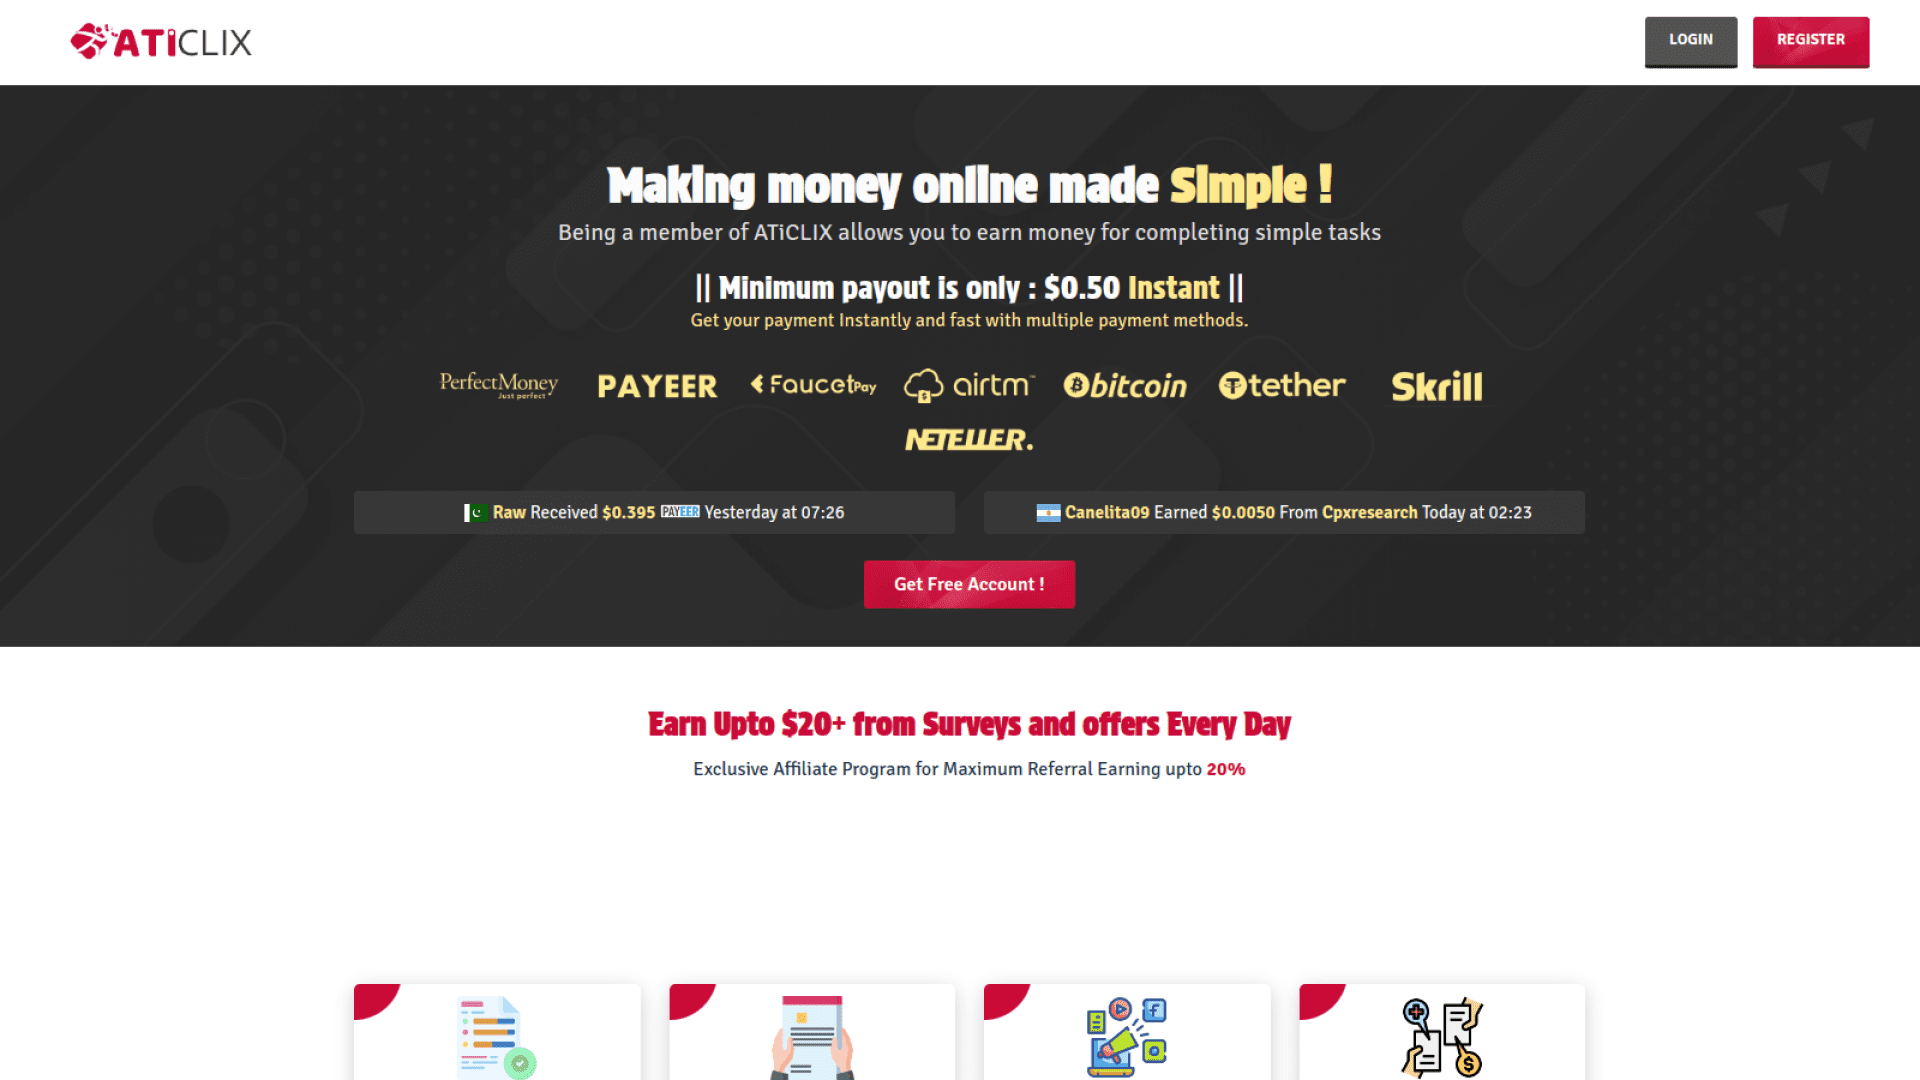 Aticlix earning website; Make Money Online: Top 6 Sites For Quick & Easy Micro-Tasks